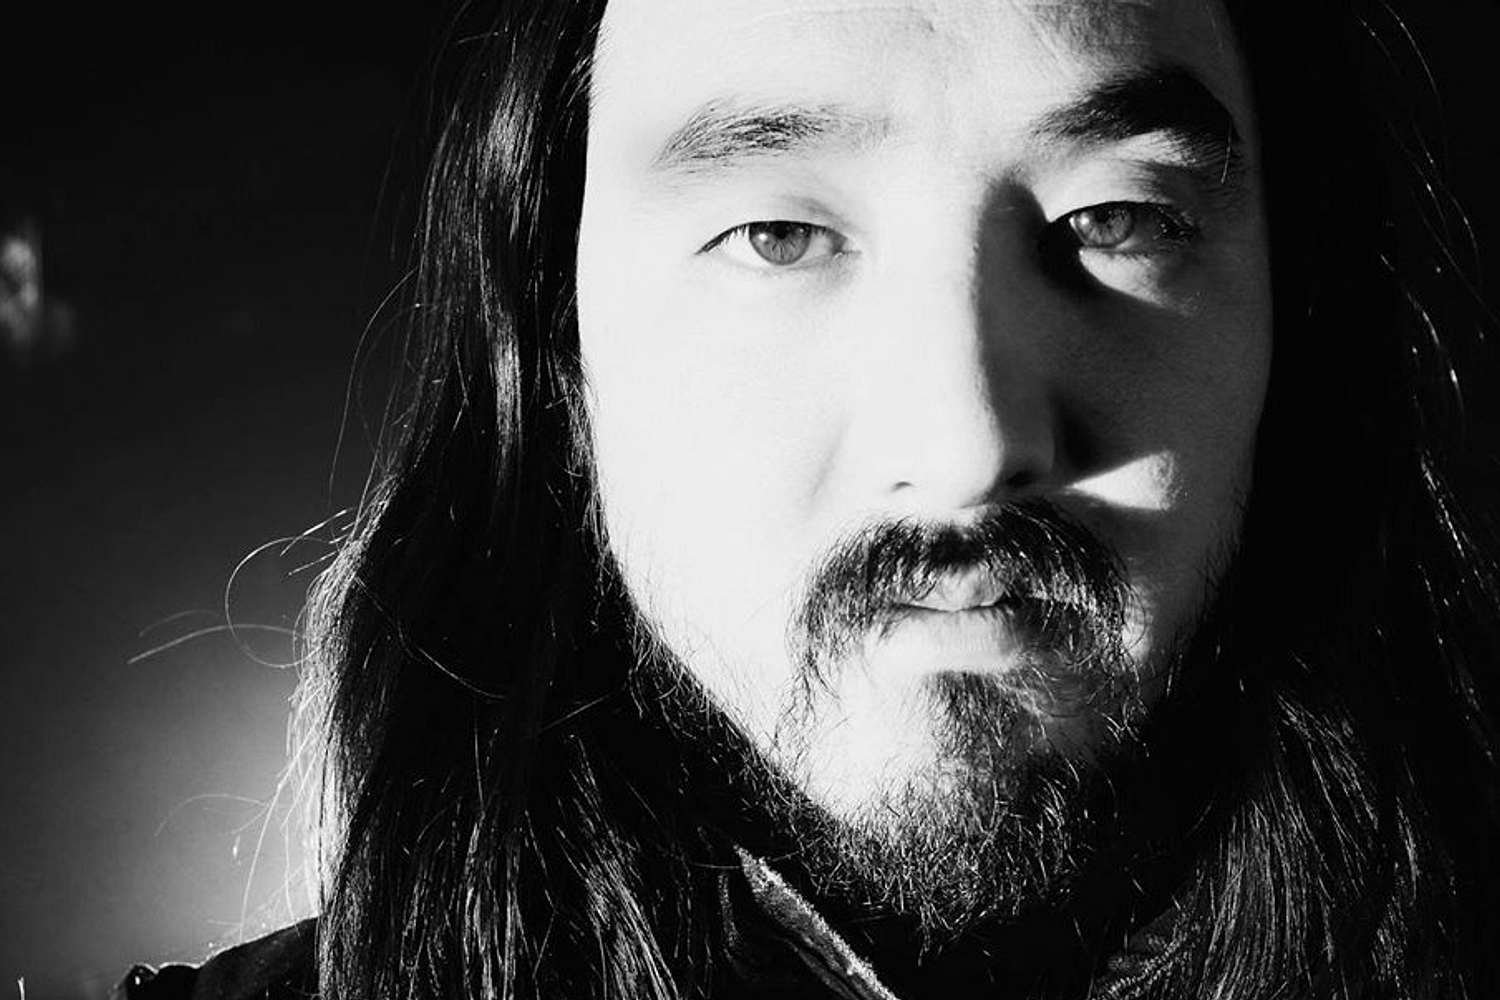 Steve Aoki airs new ‘Born to Get Wild’ video in collaboration with The Smirnoff Sound Collective